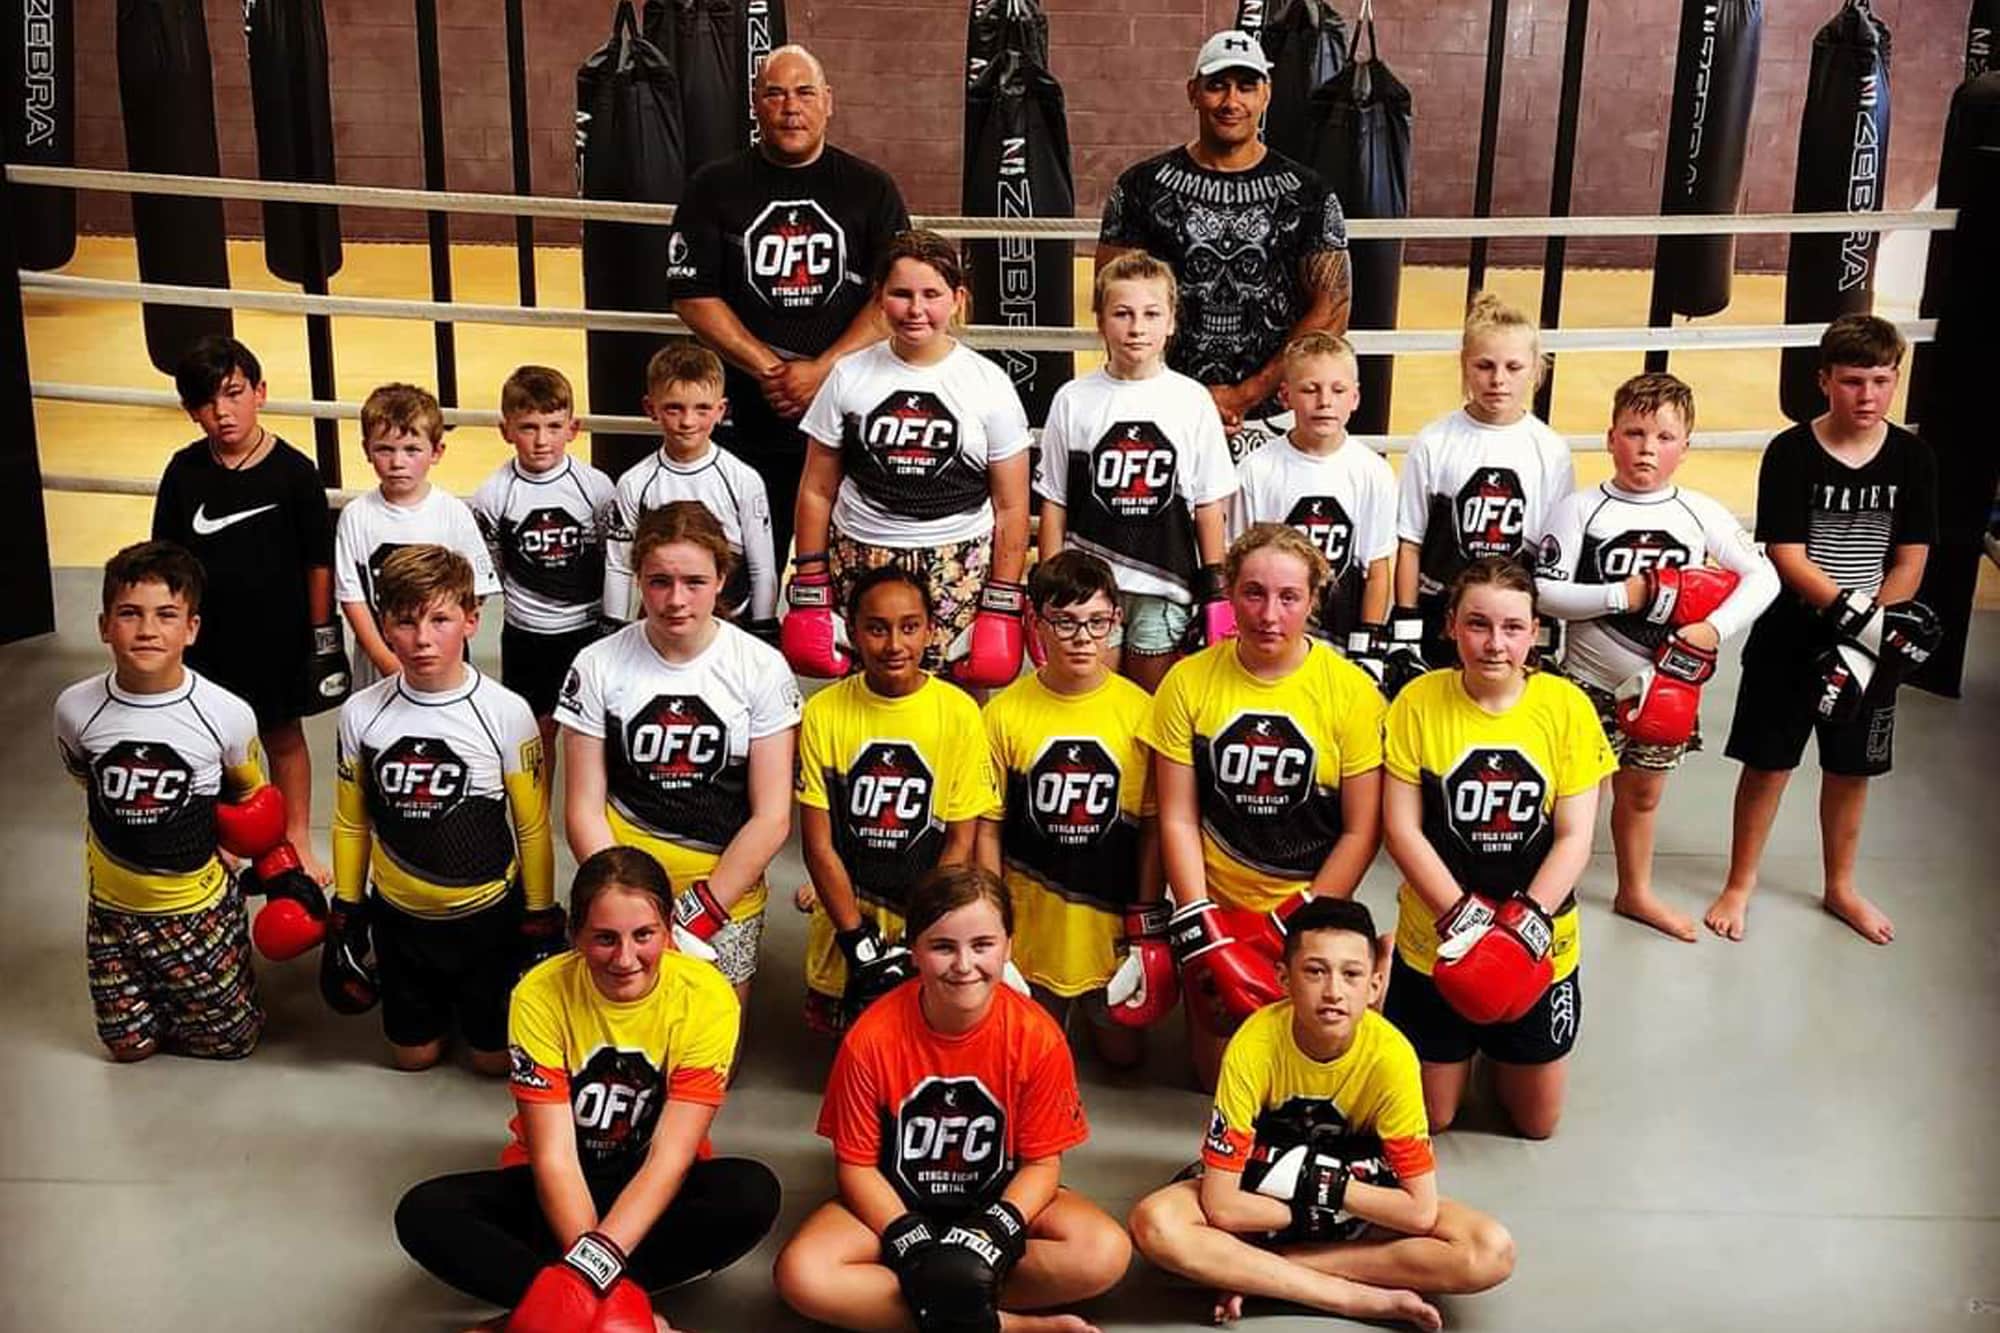 IMMAF youth grading takes off in New Zealand